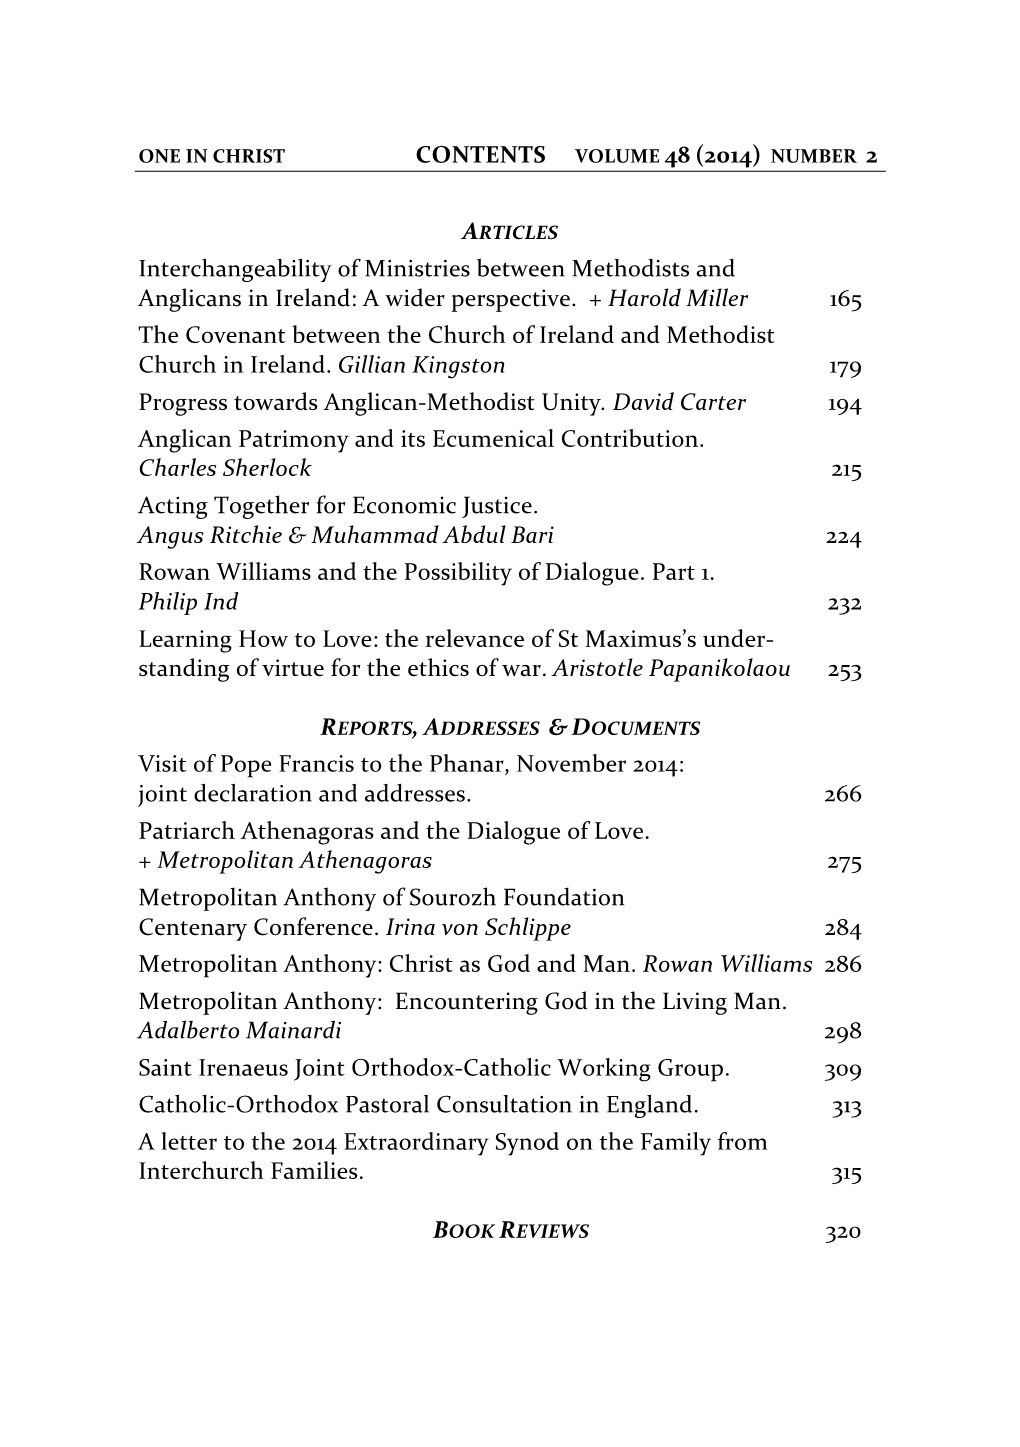 Interchangeability of Ministries Between Methodists and Anglicans in Ireland: a Wider Perspective